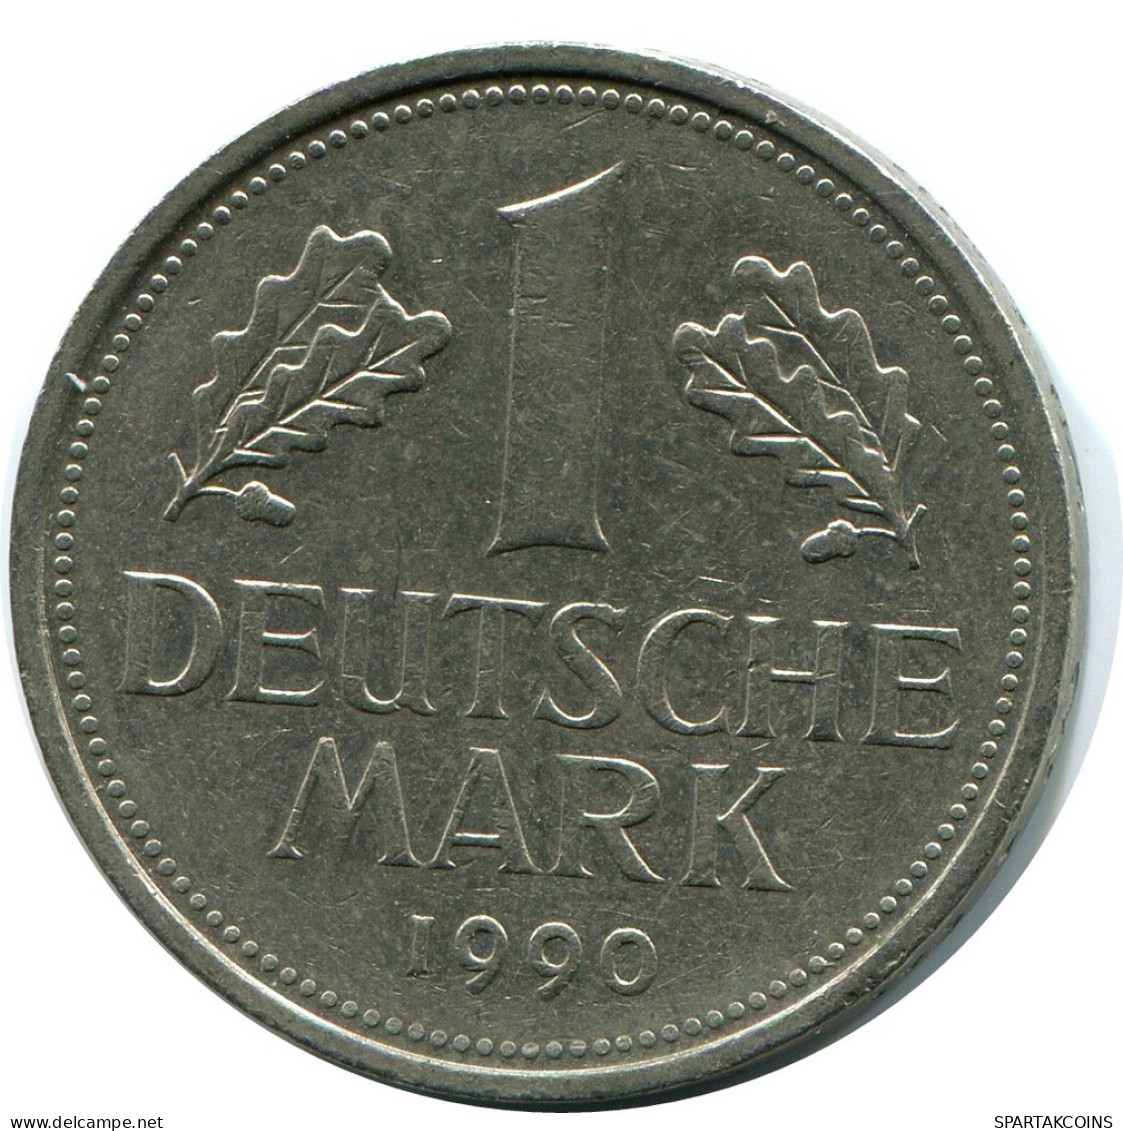 1 DM 1990 D WEST & UNIFIED GERMANY Coin #DB347.U.A - 1 Mark